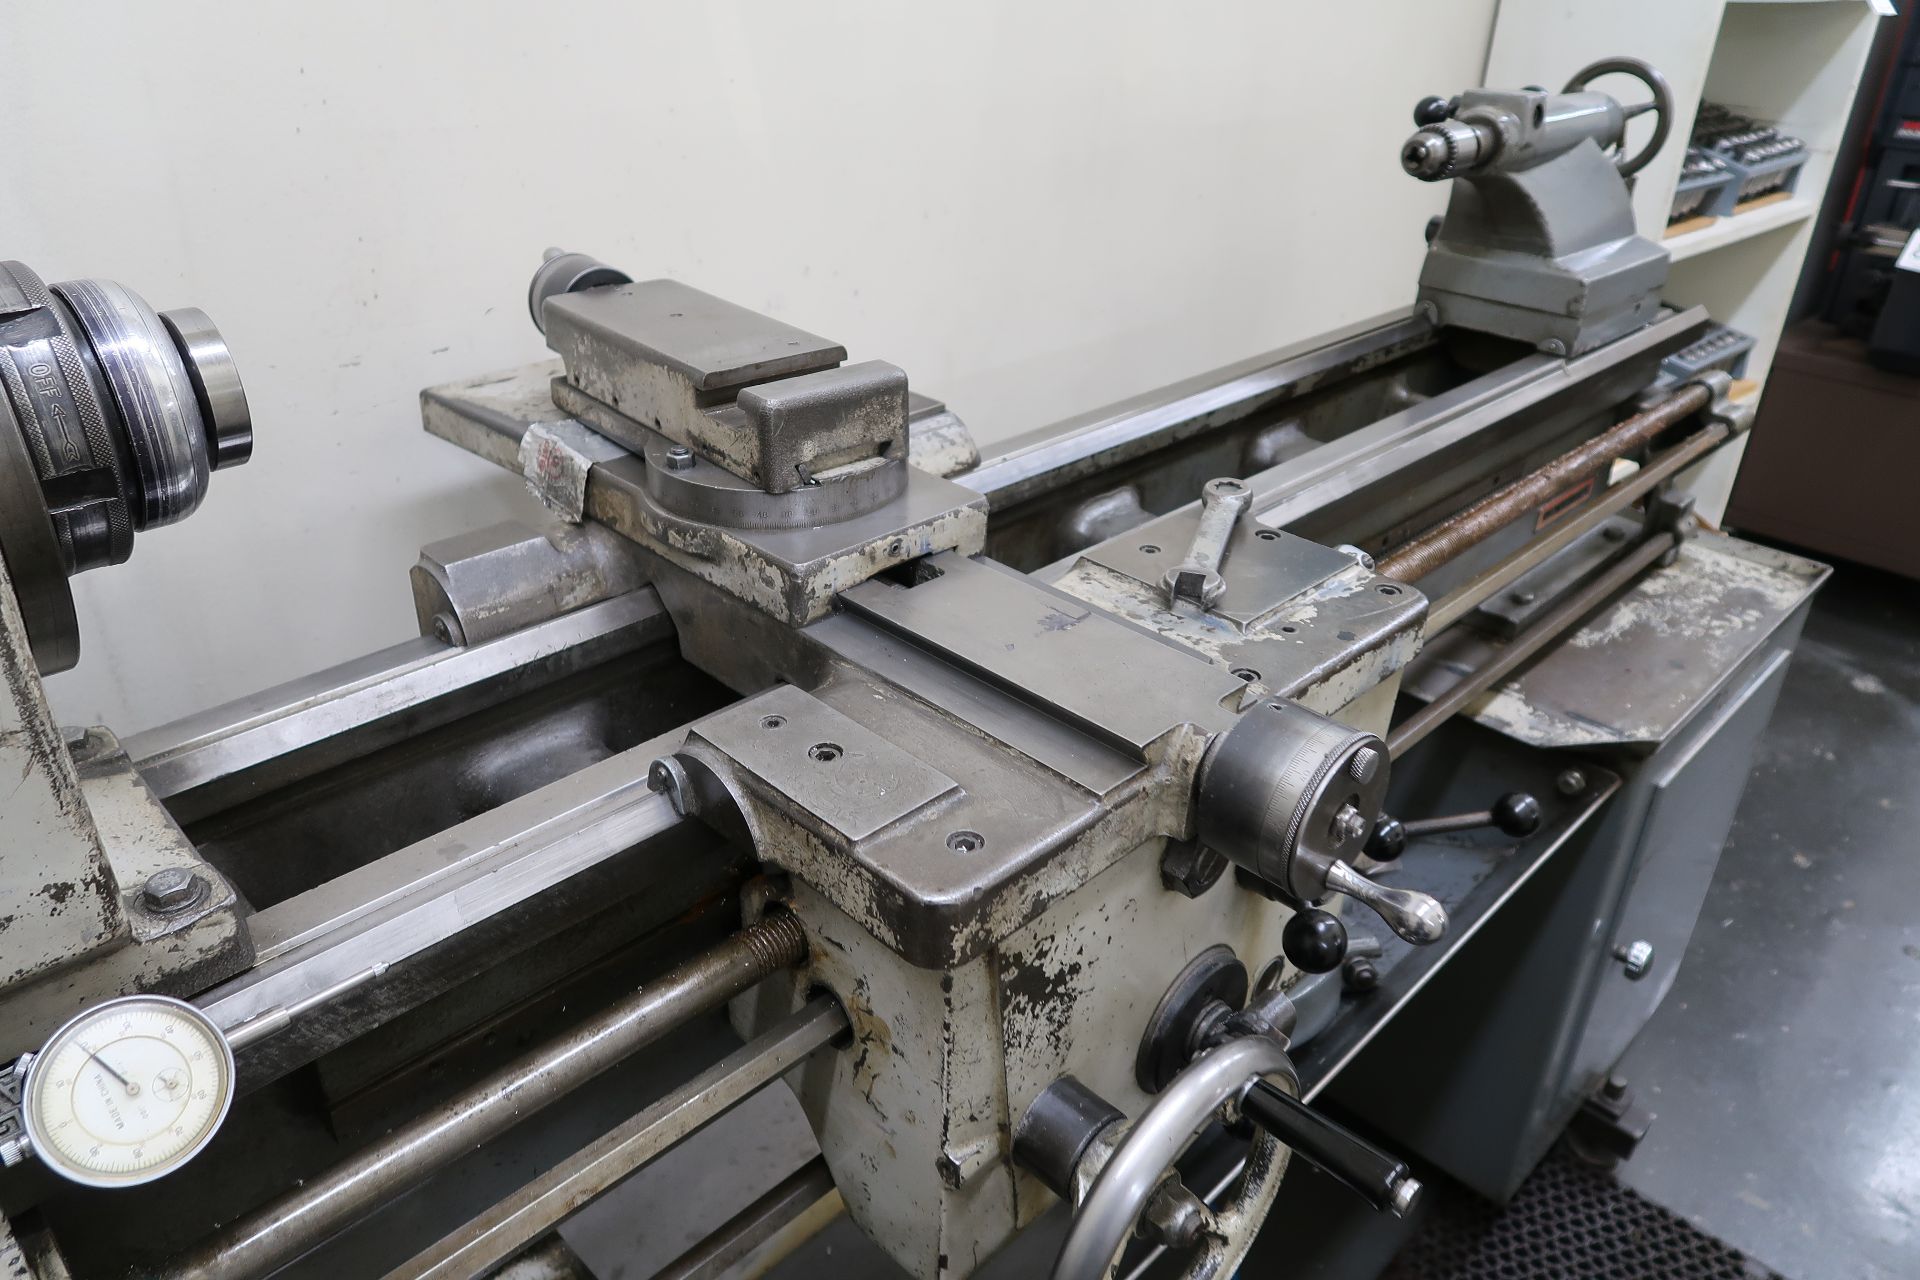 Rockwell “Delta 14” 14” x 45” Lathe s/n 1403561 w 40-1600 Adjustable RPM, (SOLD AS IS) - Image 4 of 9